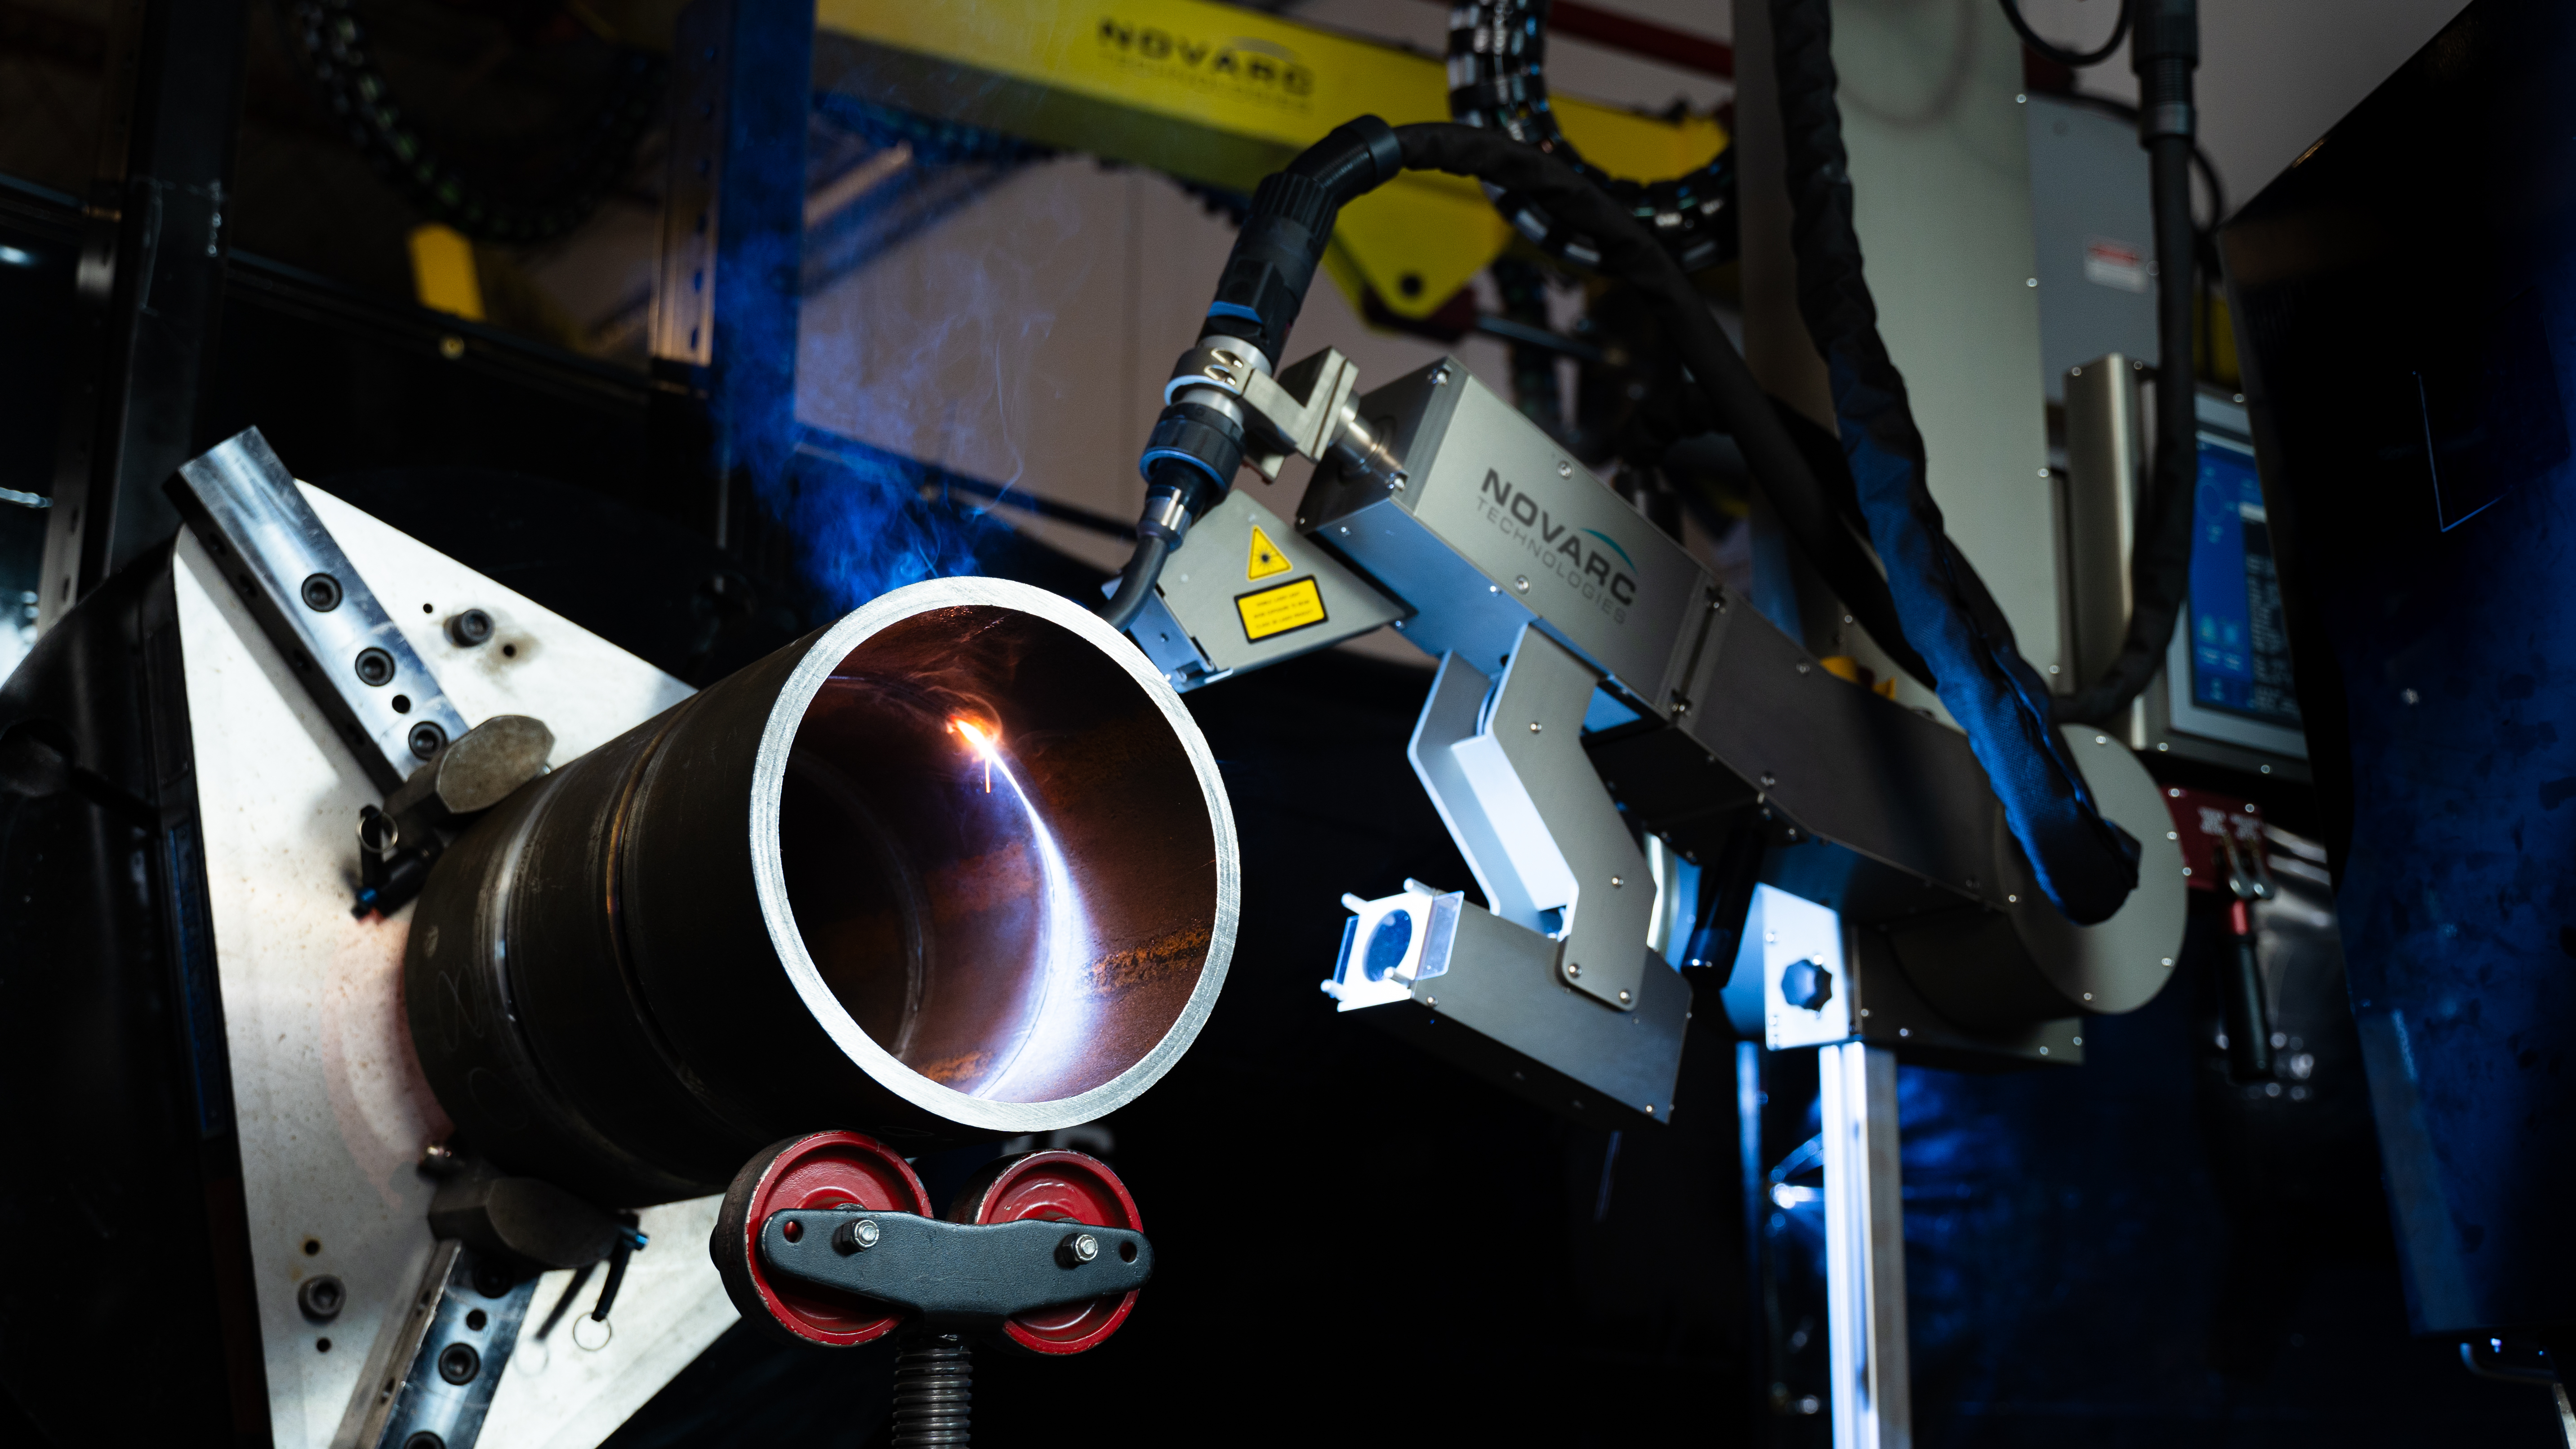 The Spool Welding Robot (SWR™) is the world’s first of its kind in pipe welding applications